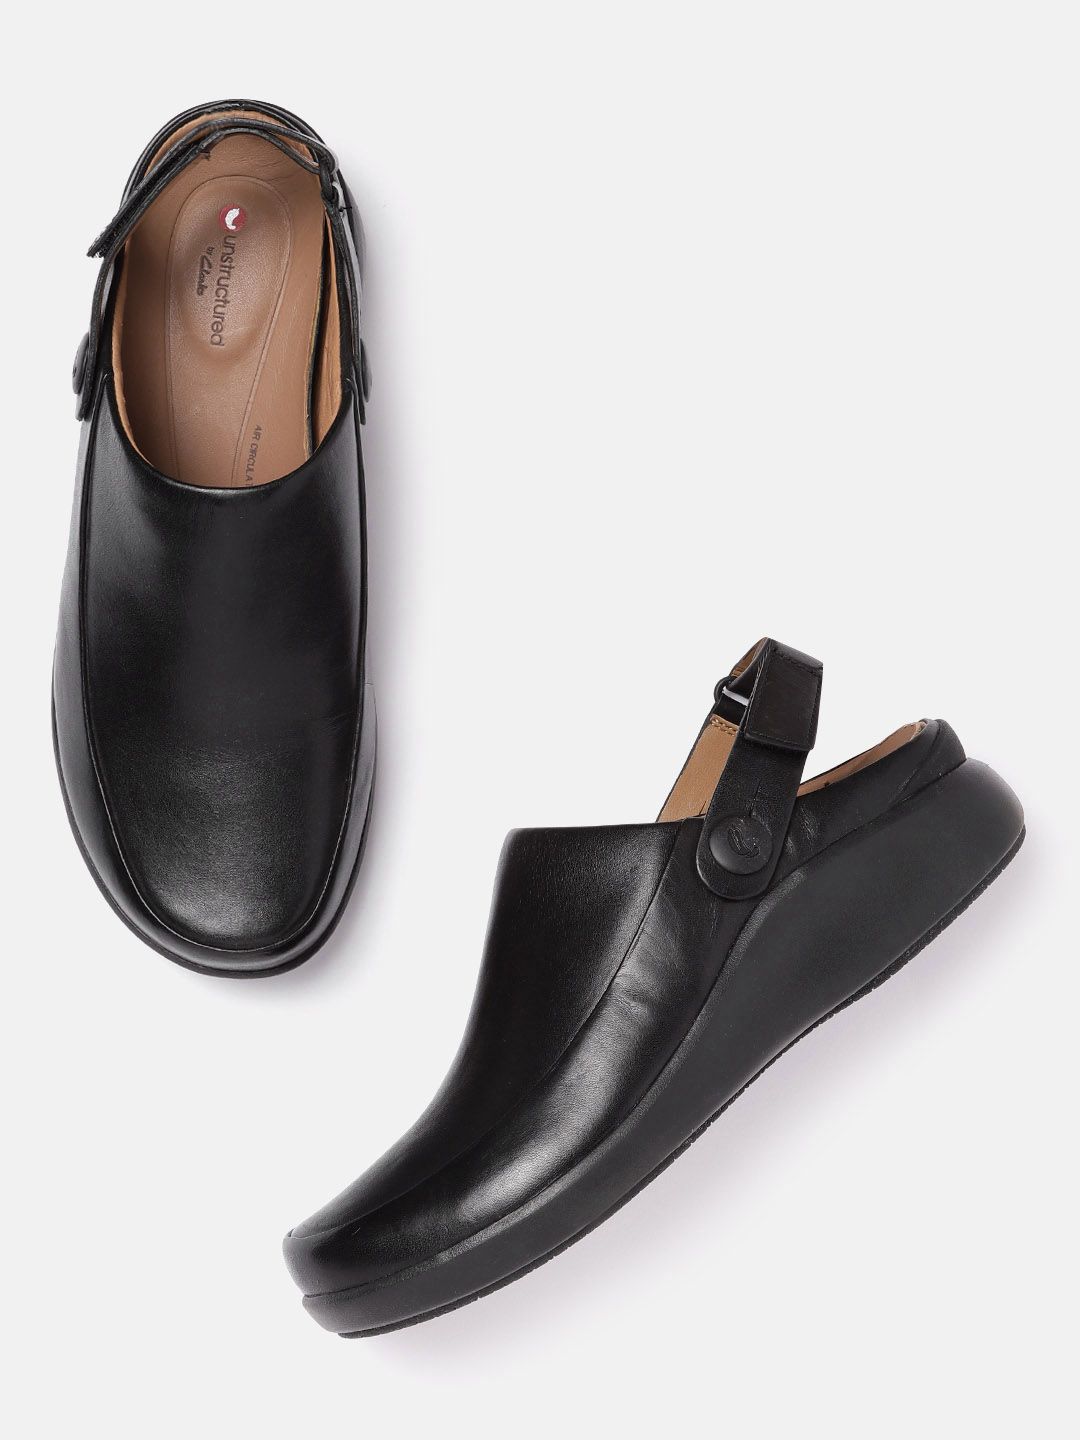 Clarks Women Black Solid Leather Clogs Price in India